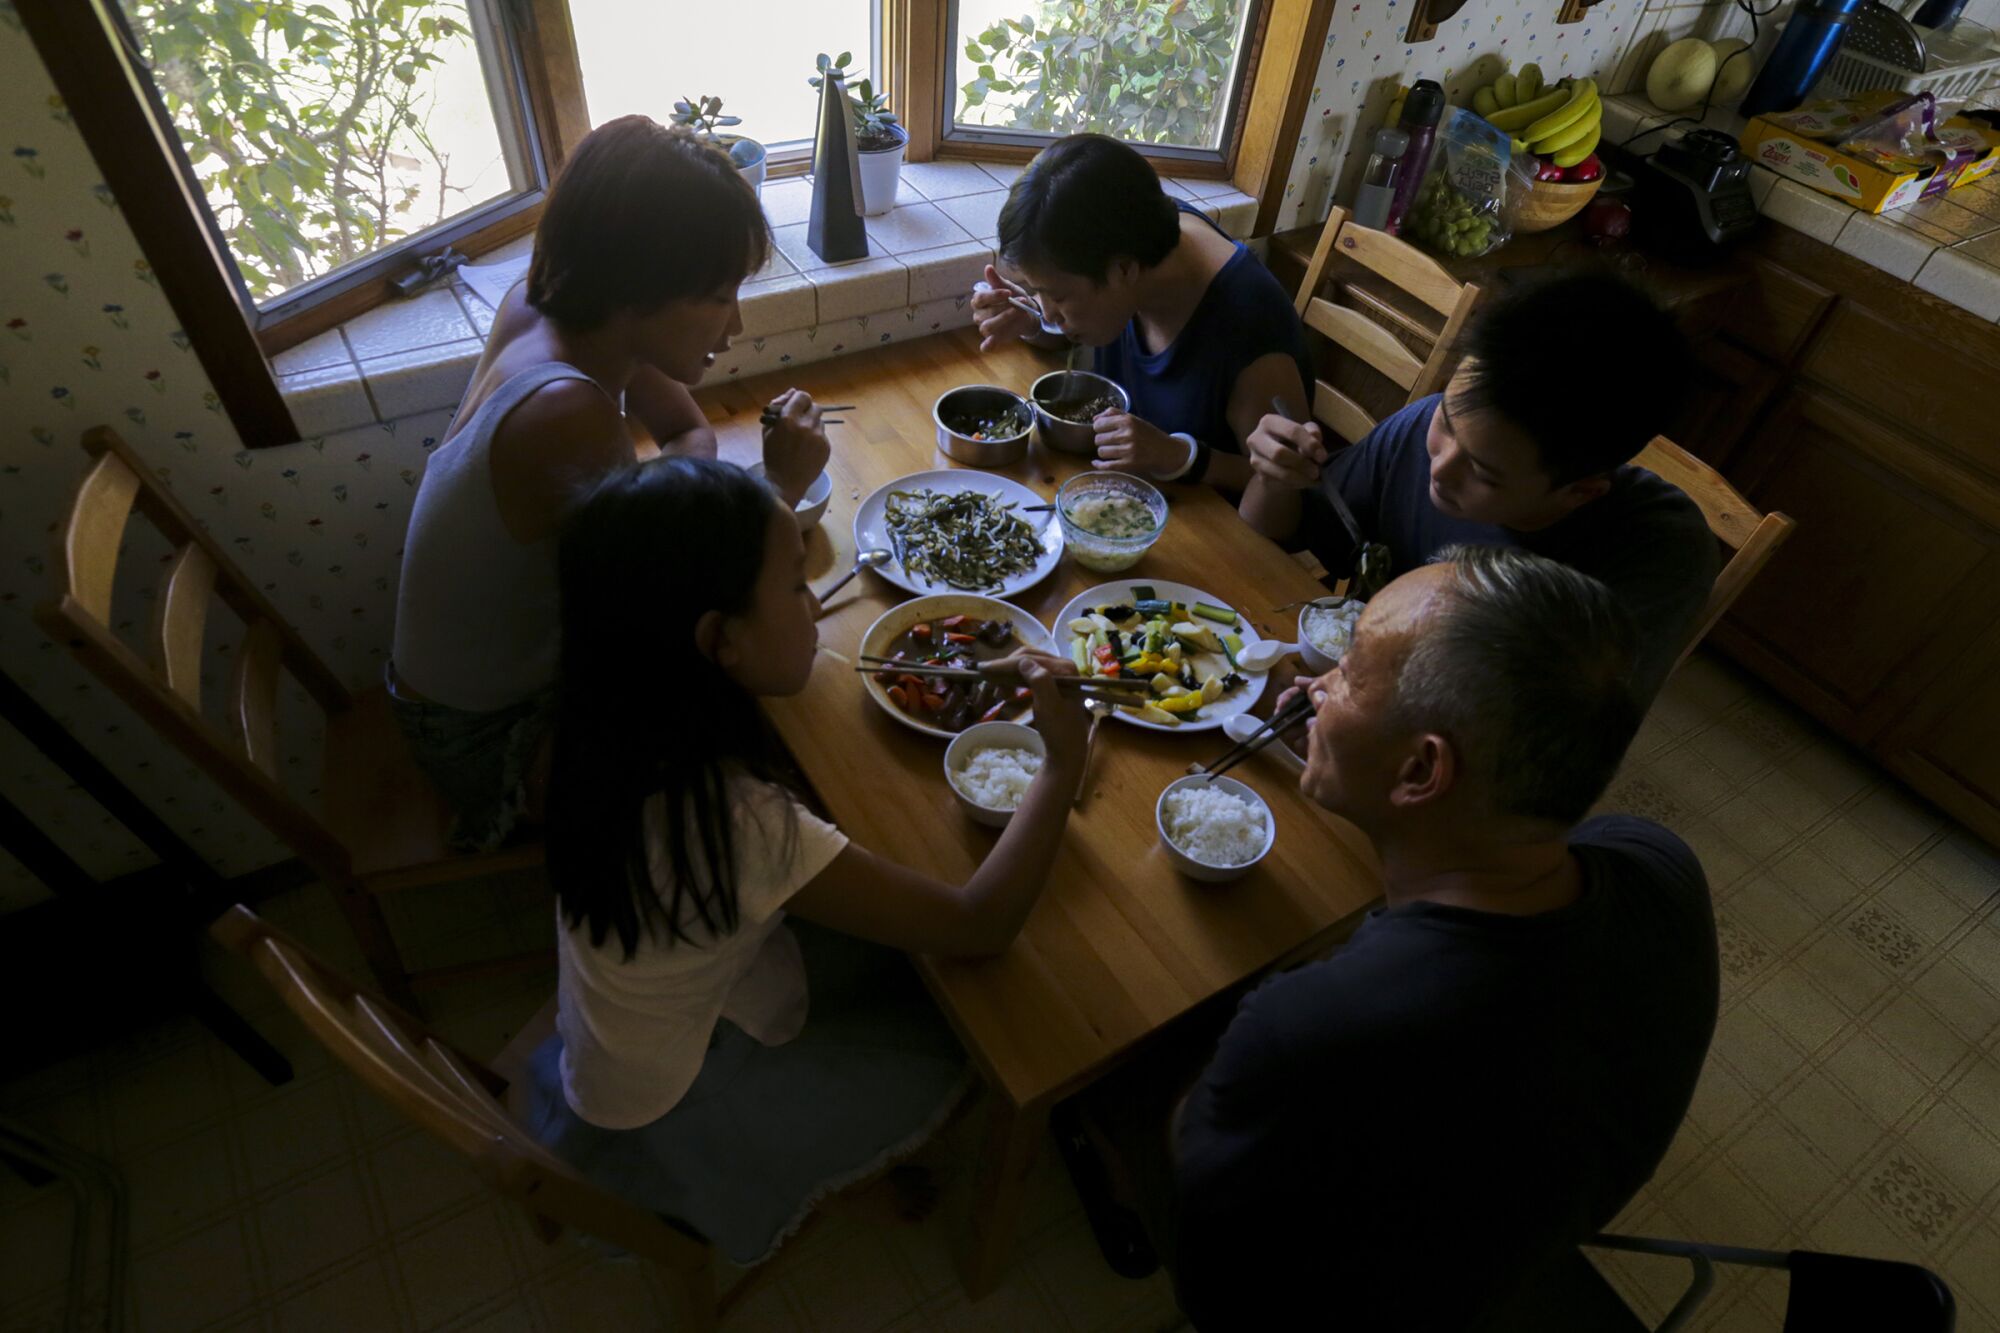 Yi Luo, far left, and her family share a meal at her home in Bradbury.